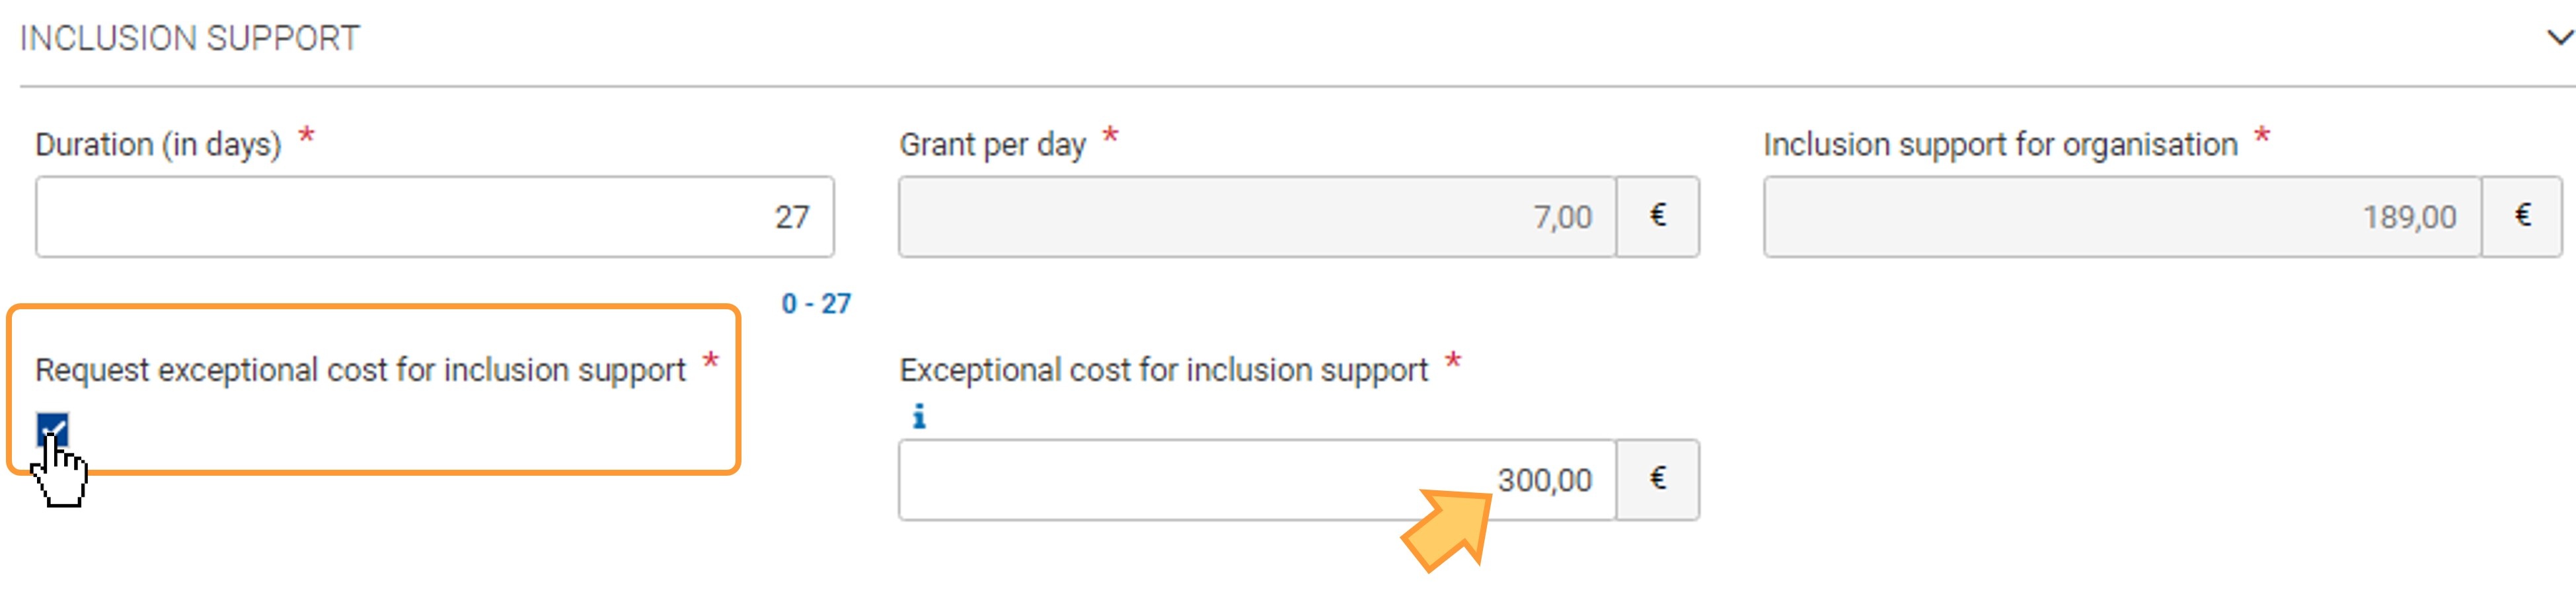 Request exceptional cost for inclusion support flag in ESC51 participations